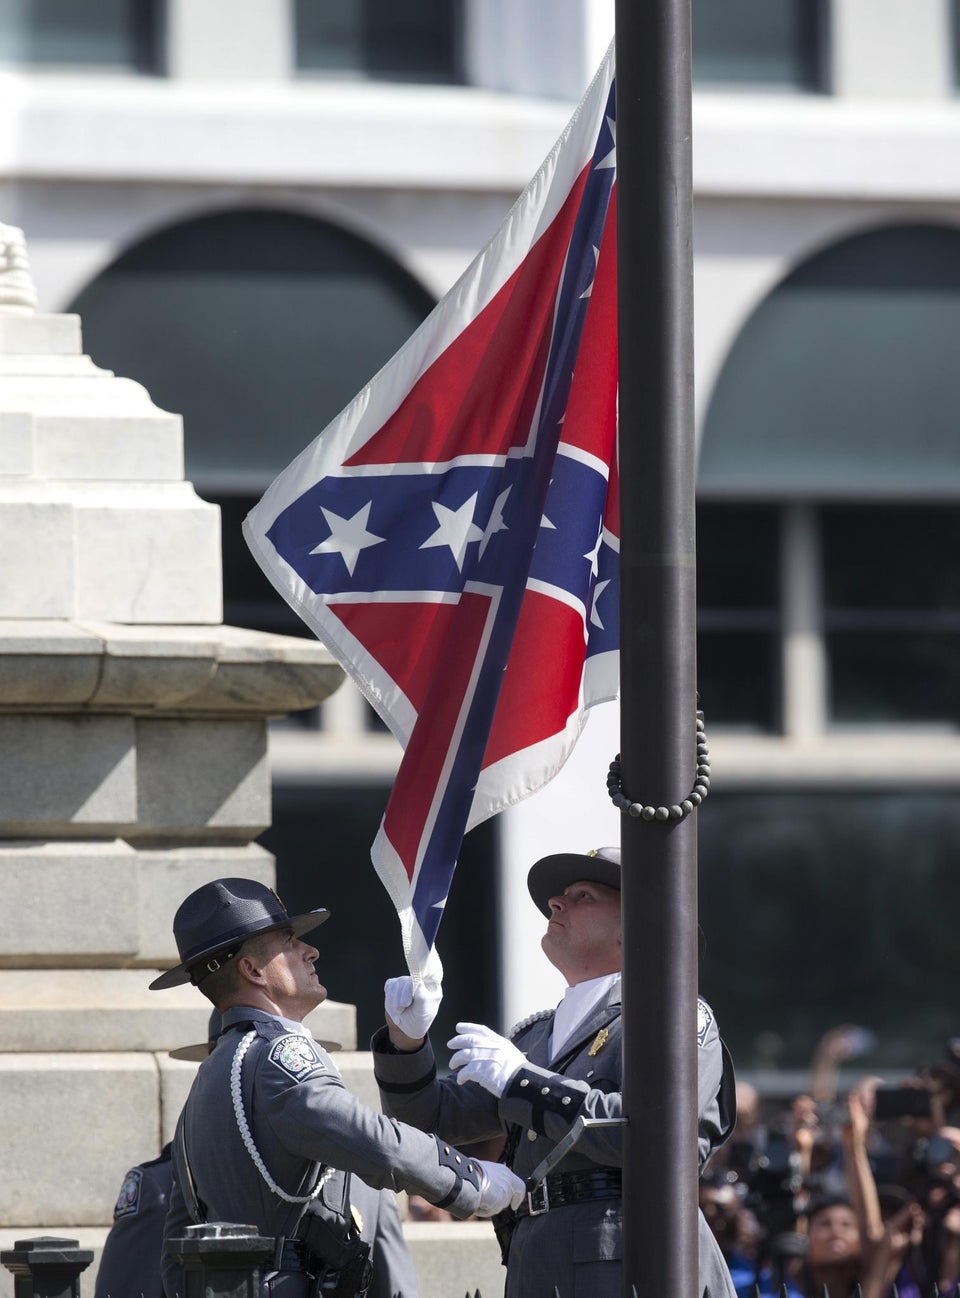 South Carolina Removes the Confederate Flag from State Capital